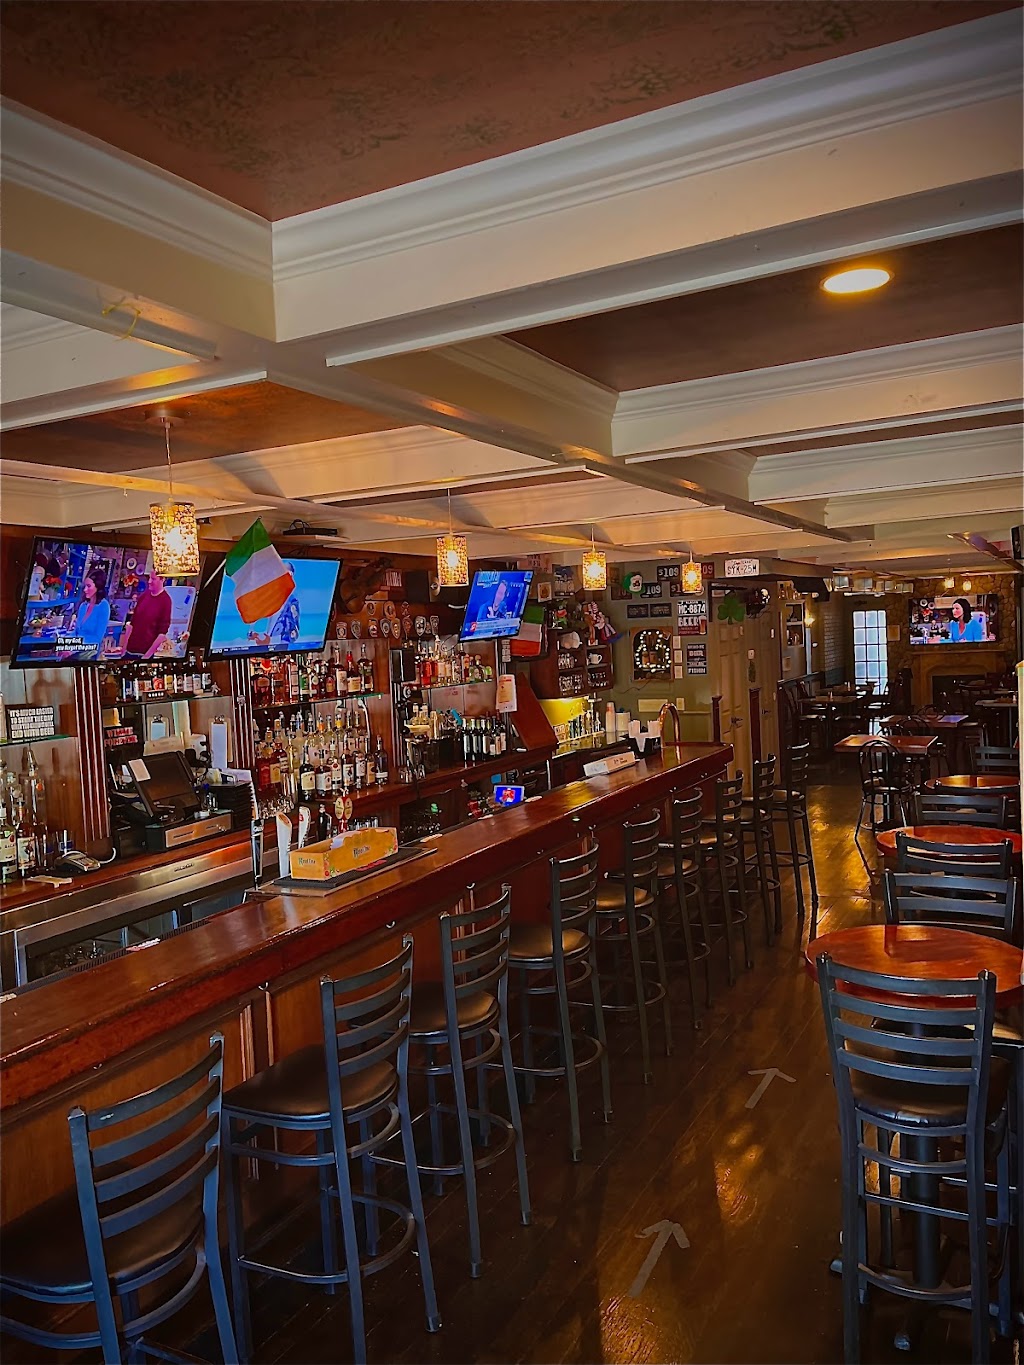 The Old Place Bar & Restaurant | 920 Hope St, Stamford, CT 06907 | Phone: (203) 553-9220